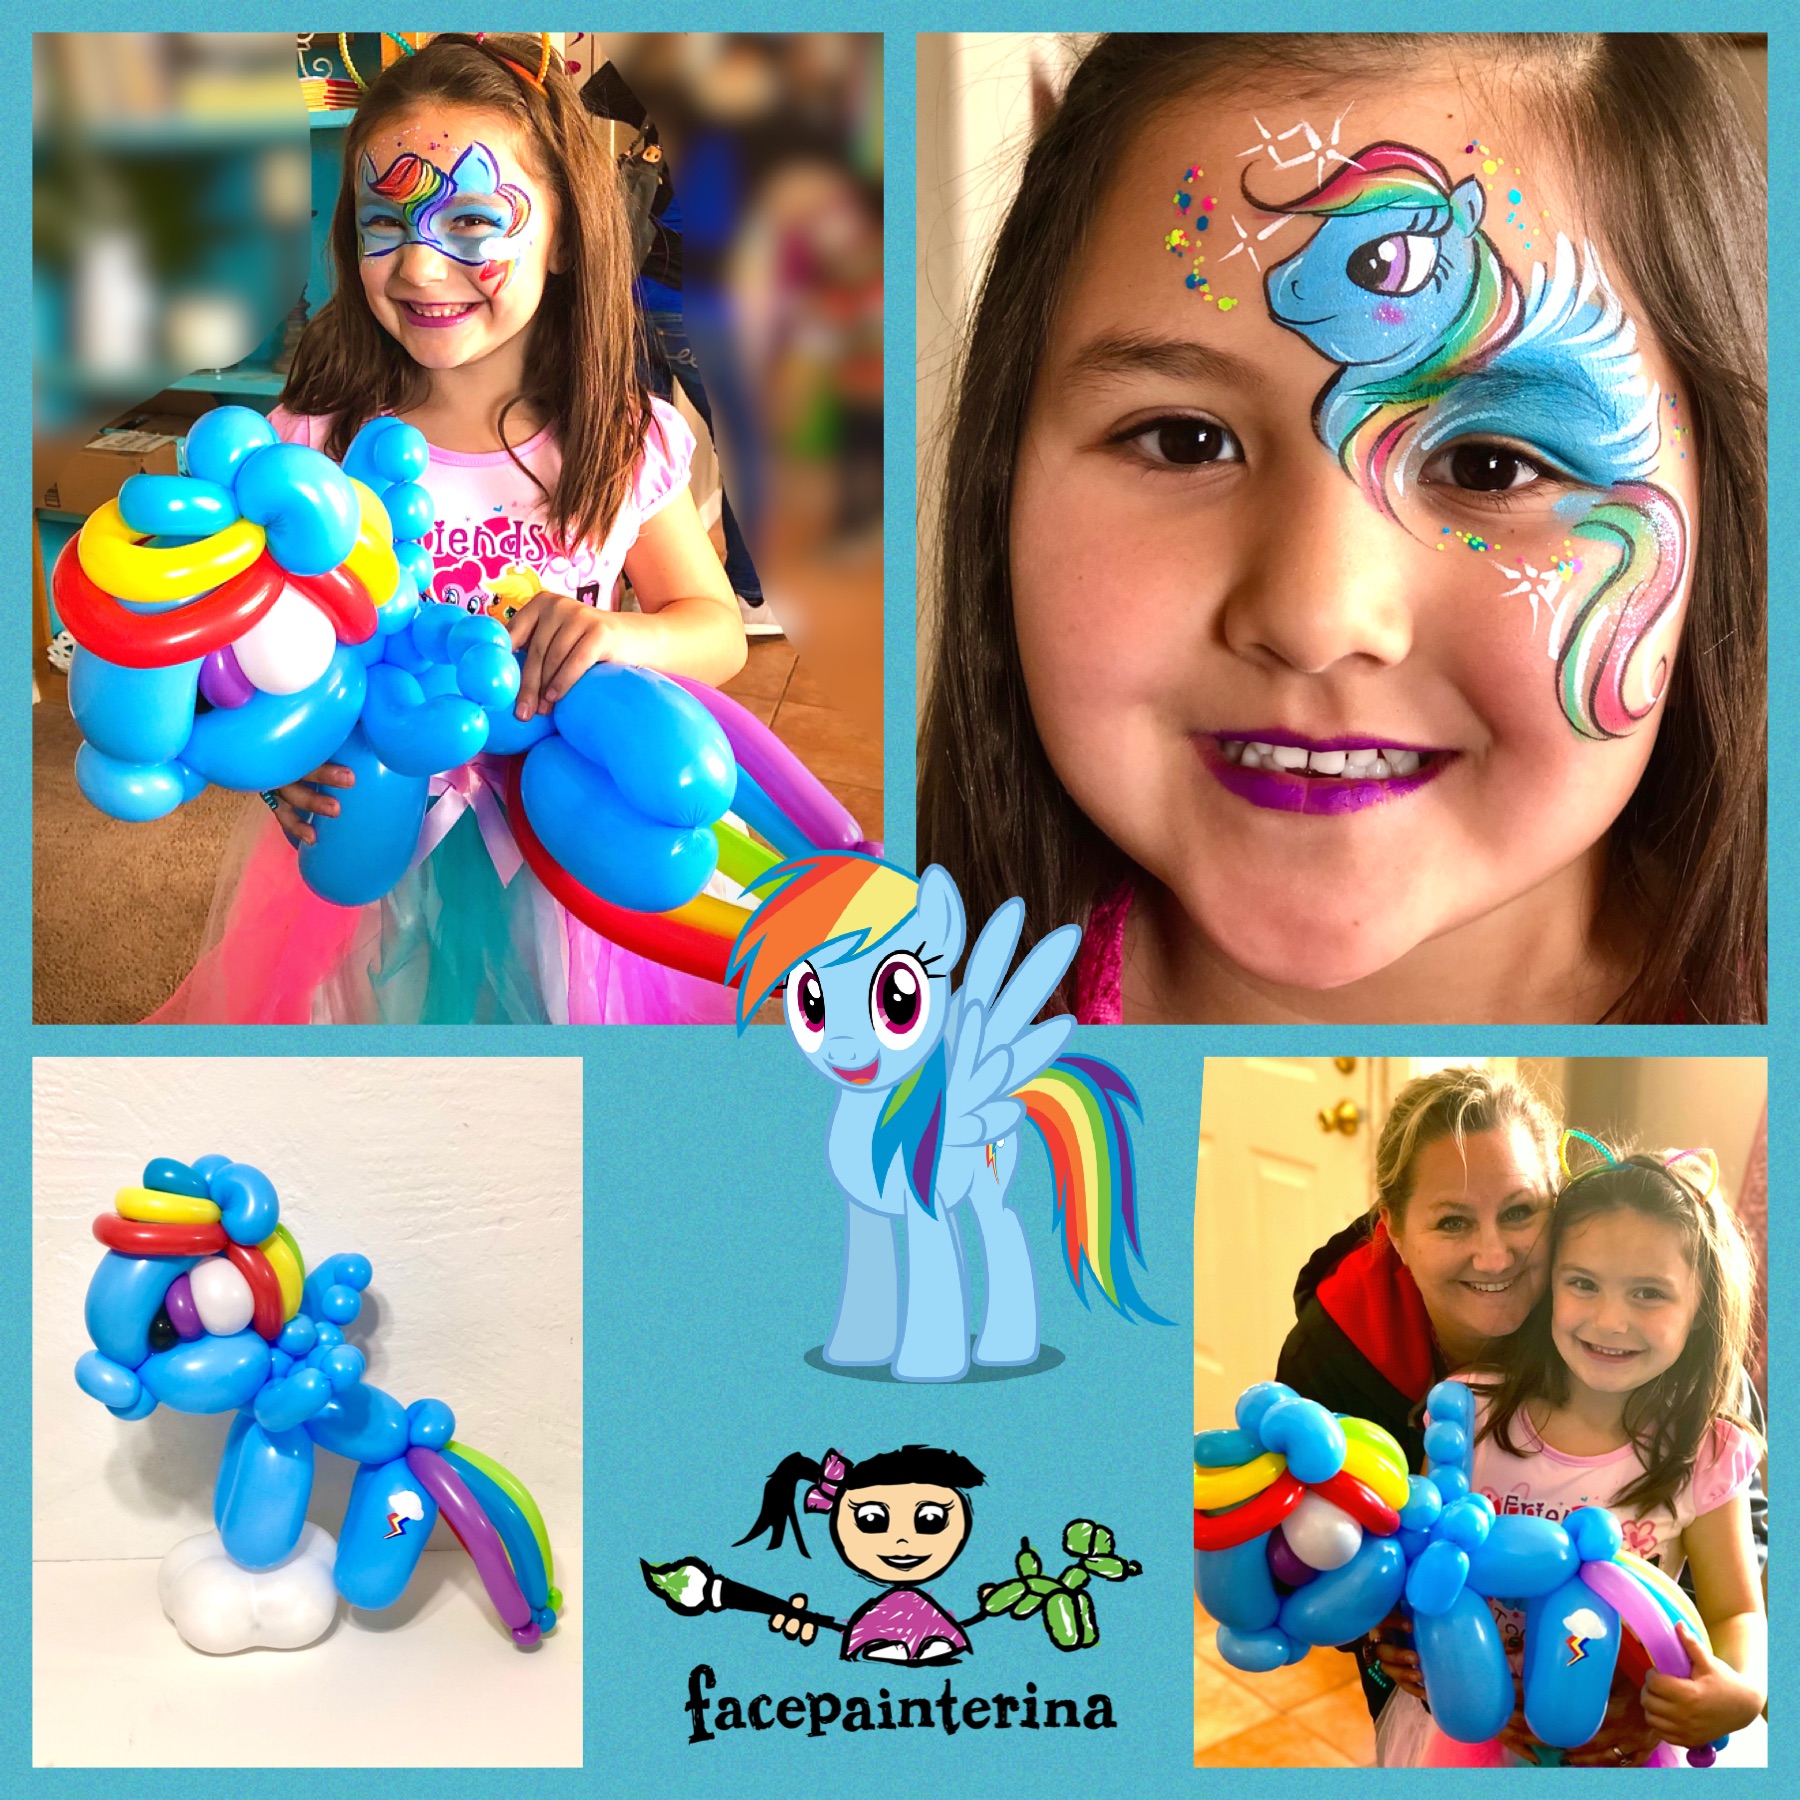 Rainbow Dash themed face painting and balloon animals.